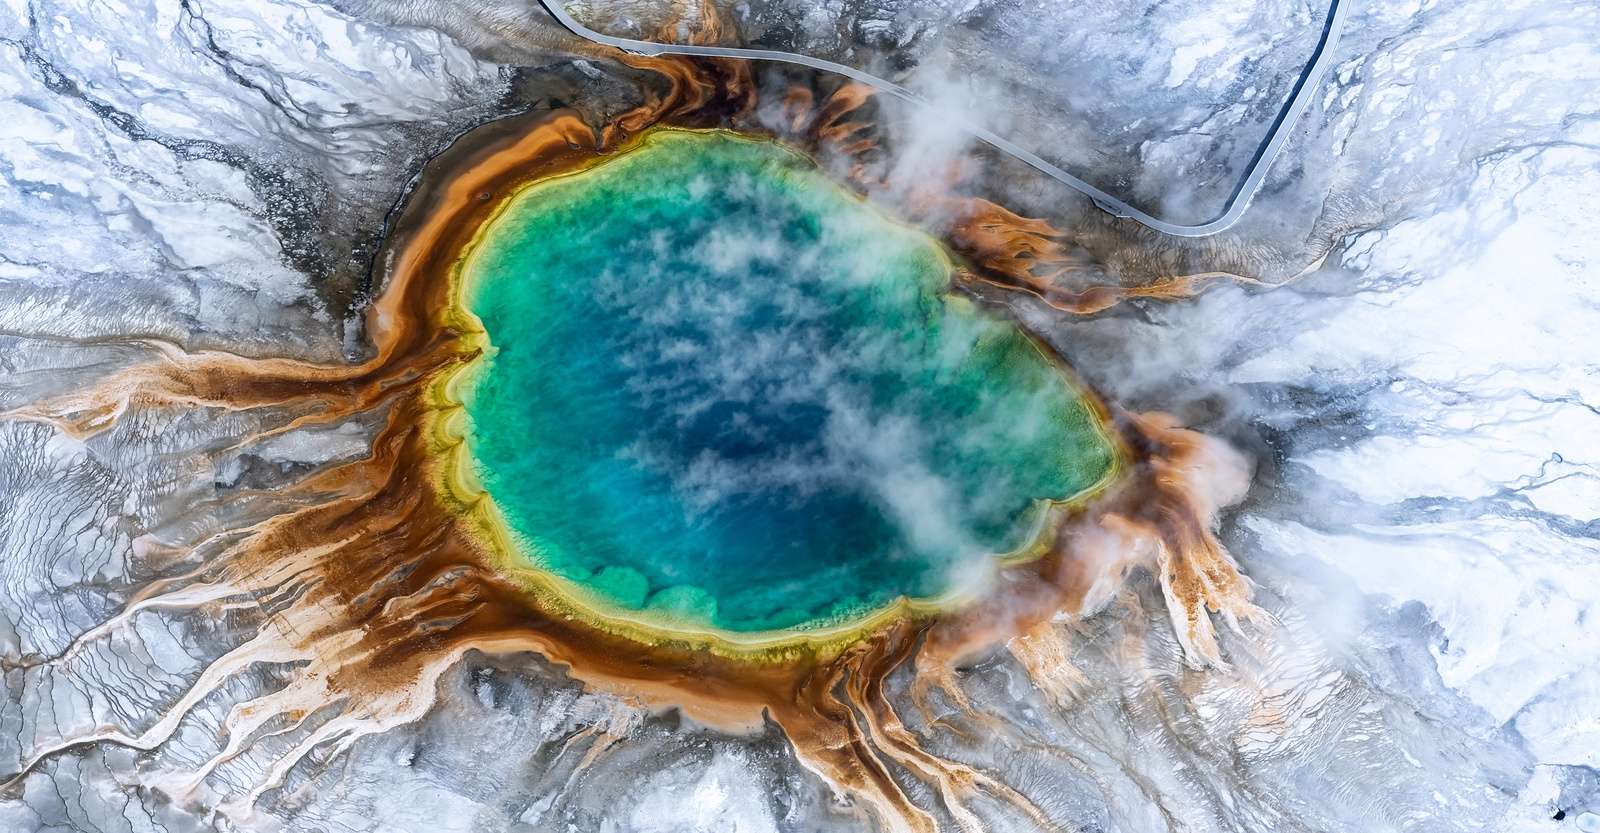 Grand Prismatic Hot Spring, Yellowstone National Park, Wyoming.